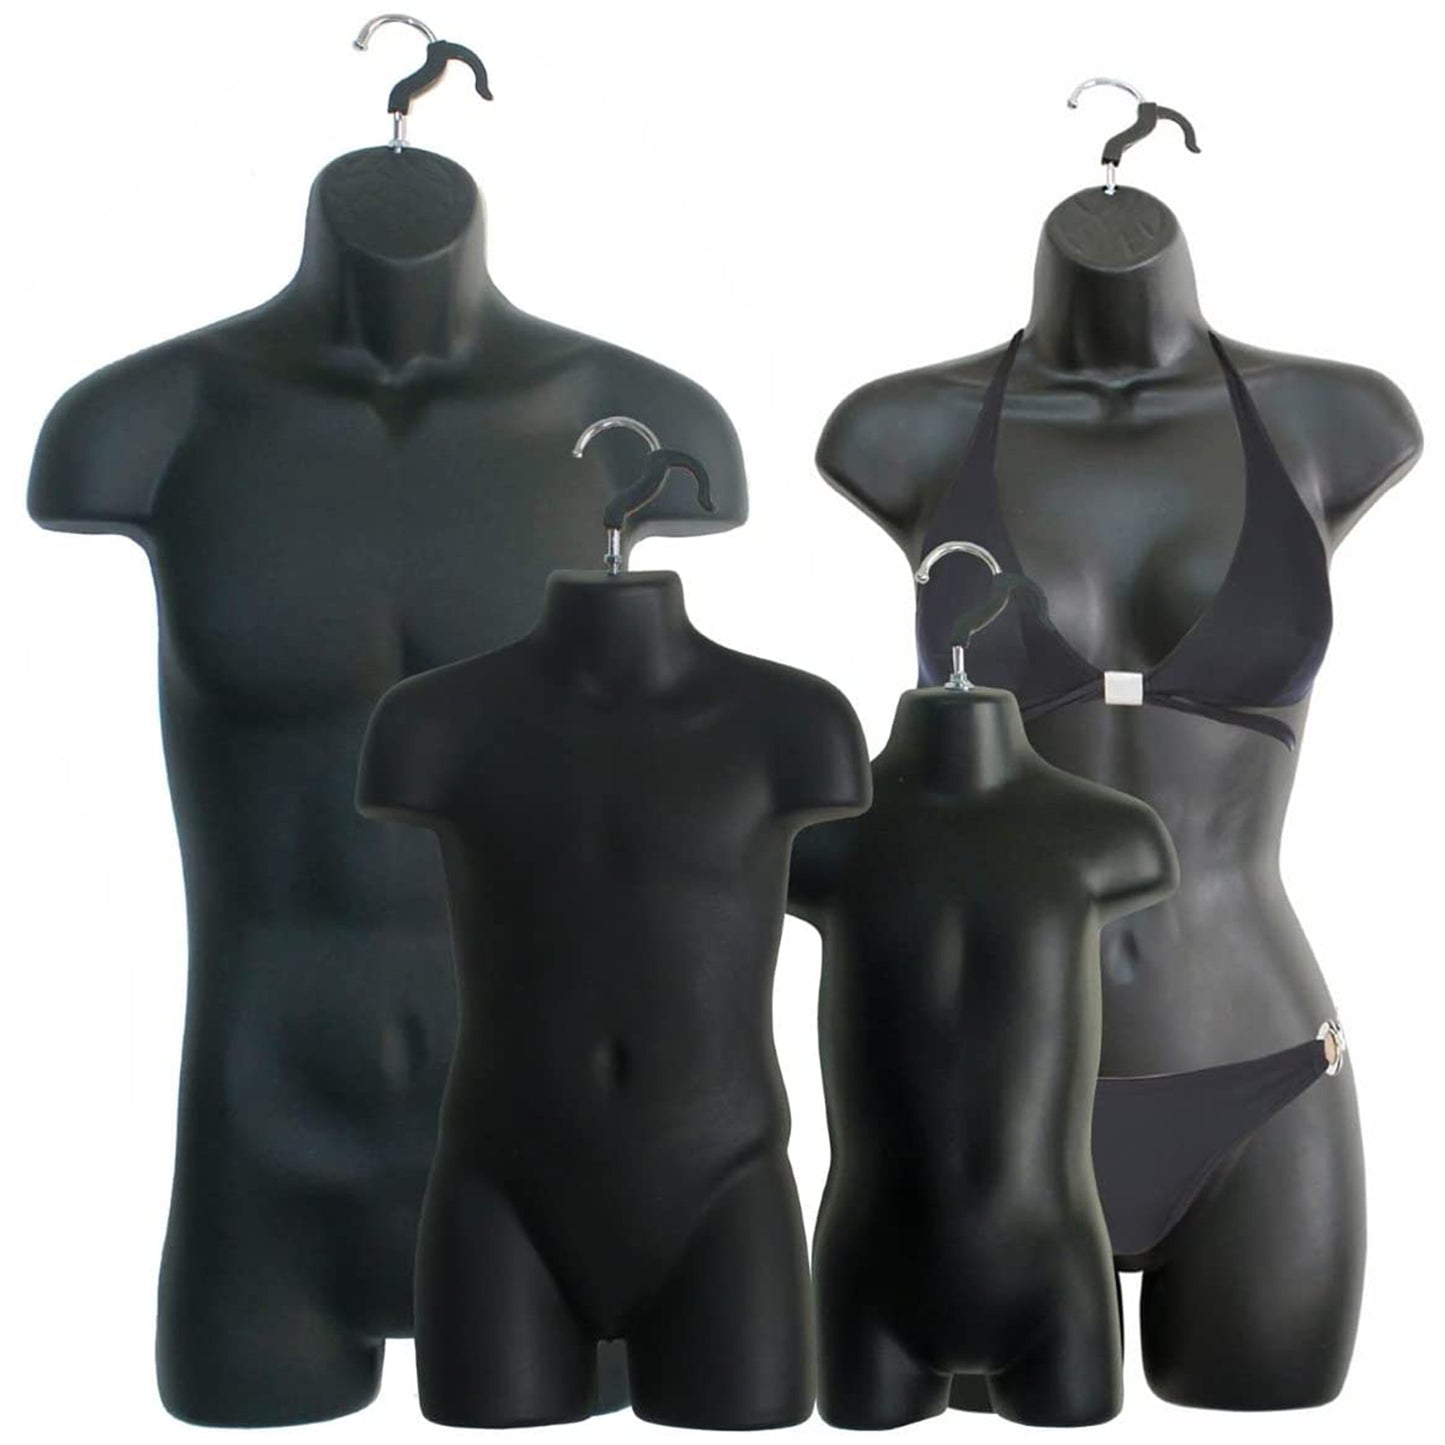 Only Hangers Women's Torso Female Plastic Hanging Mannequin Body Form White  - Sold in Sets of 1, 2 , 3, and 4 (1)